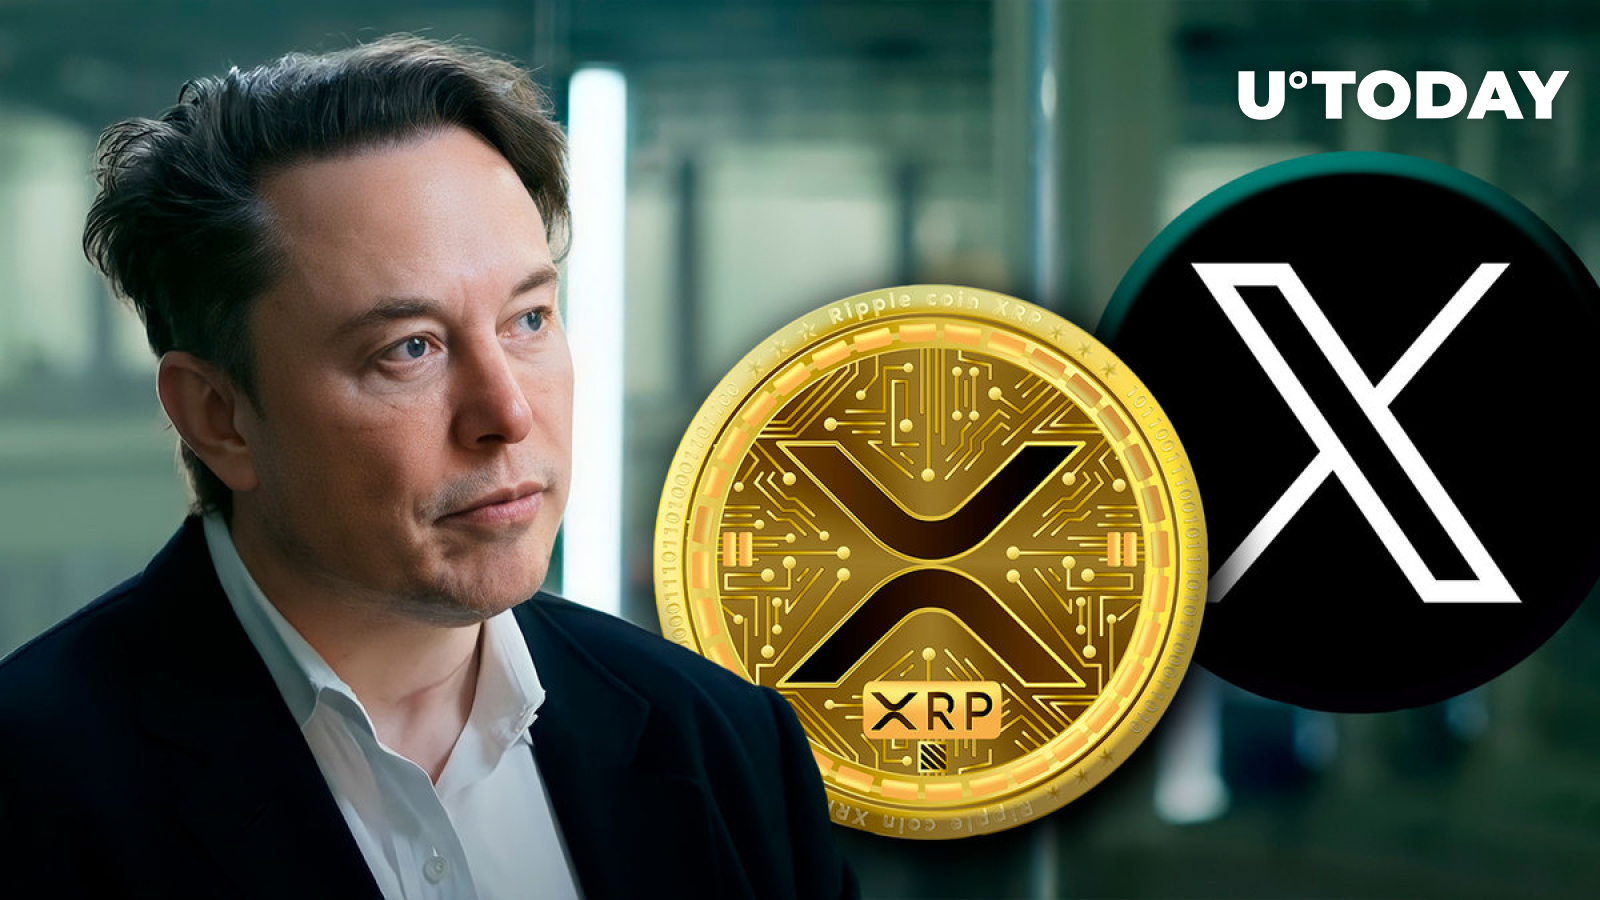 XRP Enthusiasts Responds to Elon Musk’s Tweet, Predicts Coin Will Reach Orbit After Takeoff